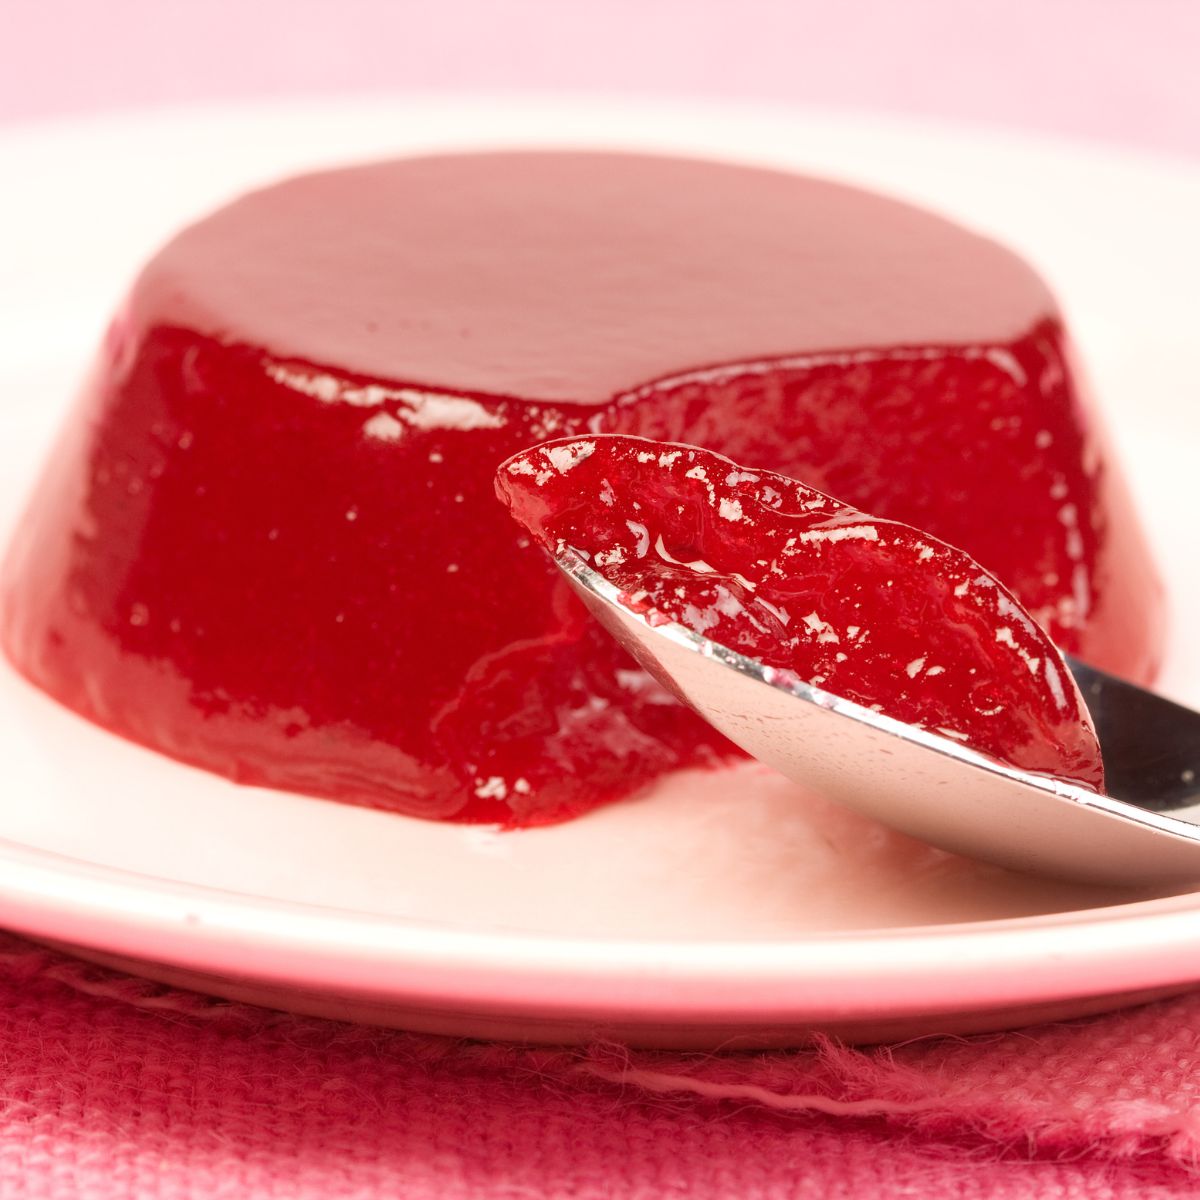 homemade cranberry jelly mold on a white plate, with a spoon next to it.